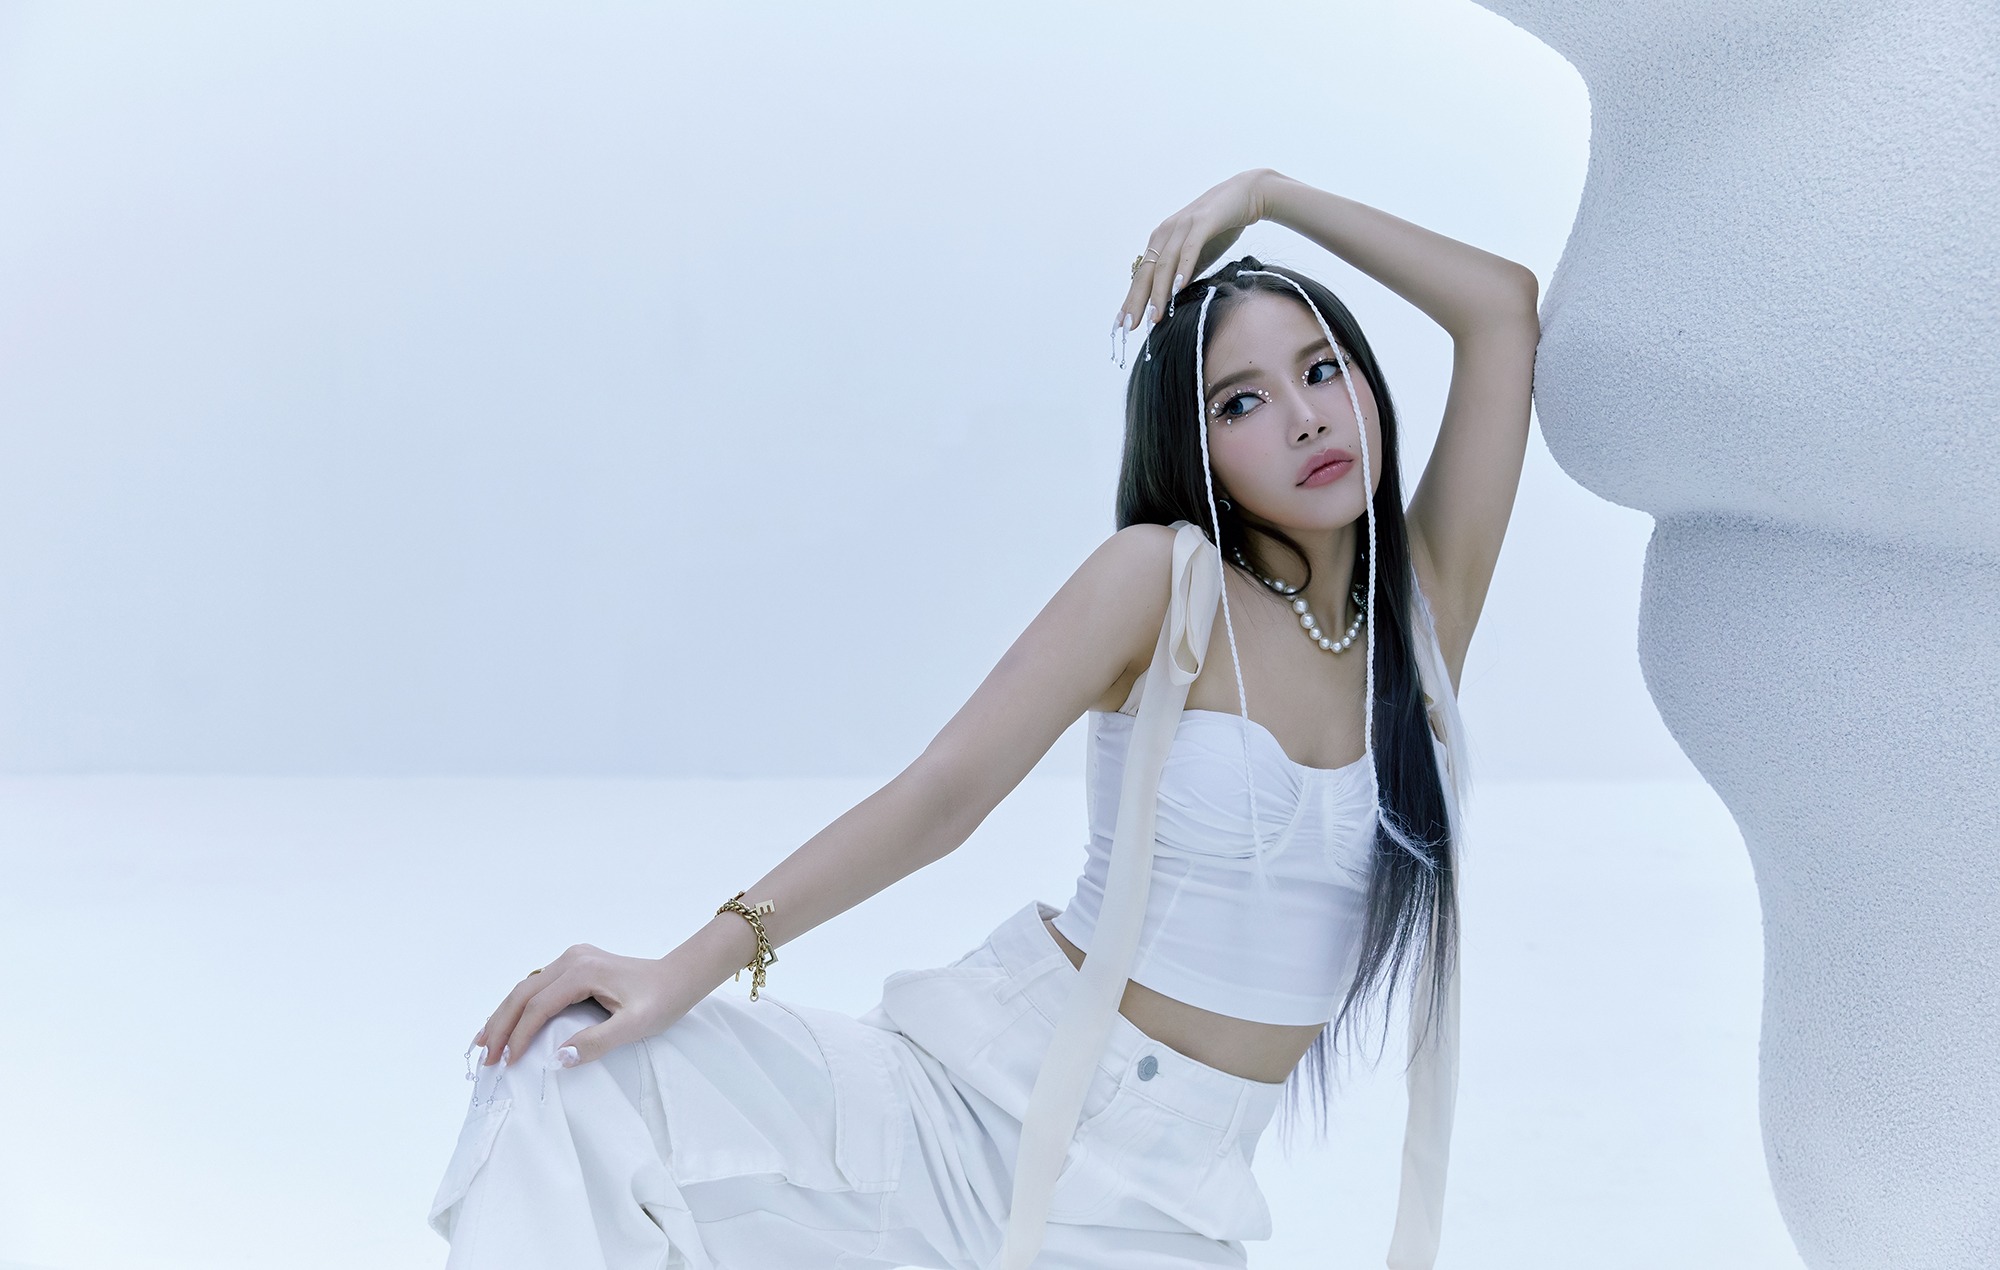 Solar on going solo: “I’m going to do what I want to do”